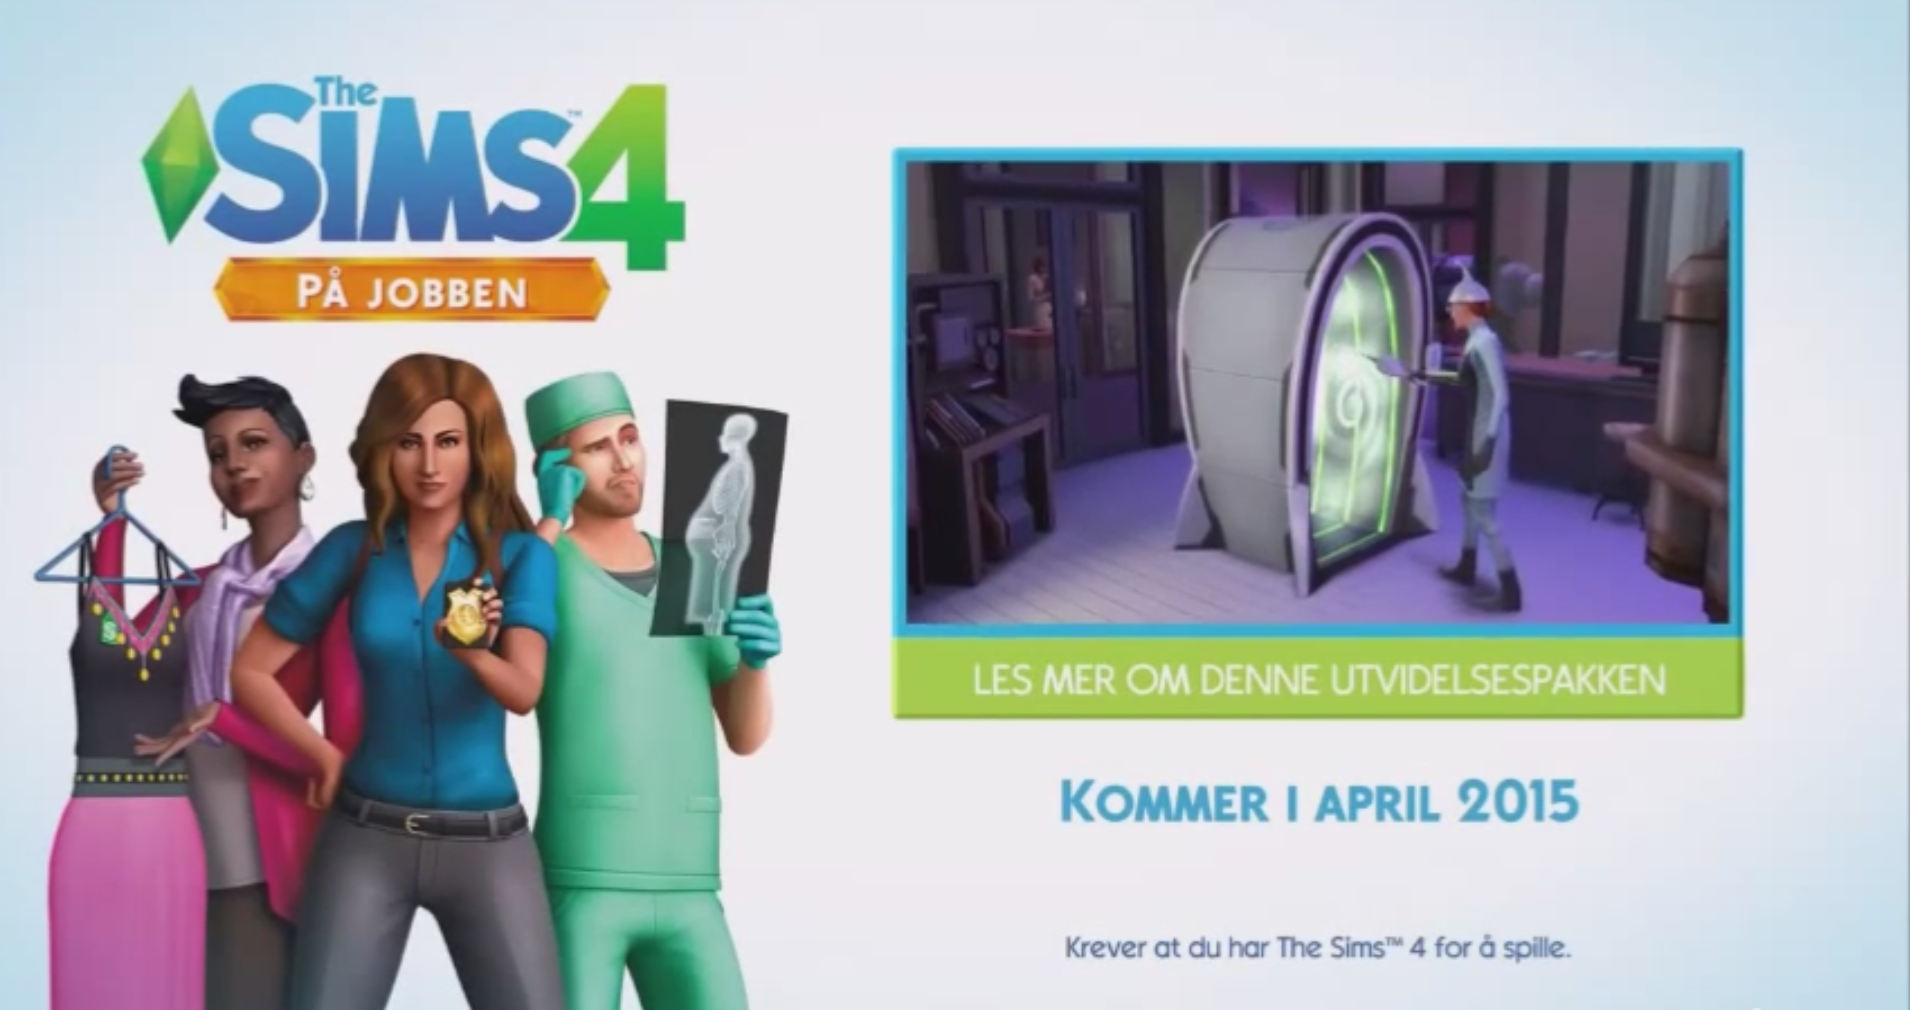 http://www.loadthegame.com/wp-content/uploads/2015/02/The-Sims-4-At-Work-Expansion-Logo-Leak.png